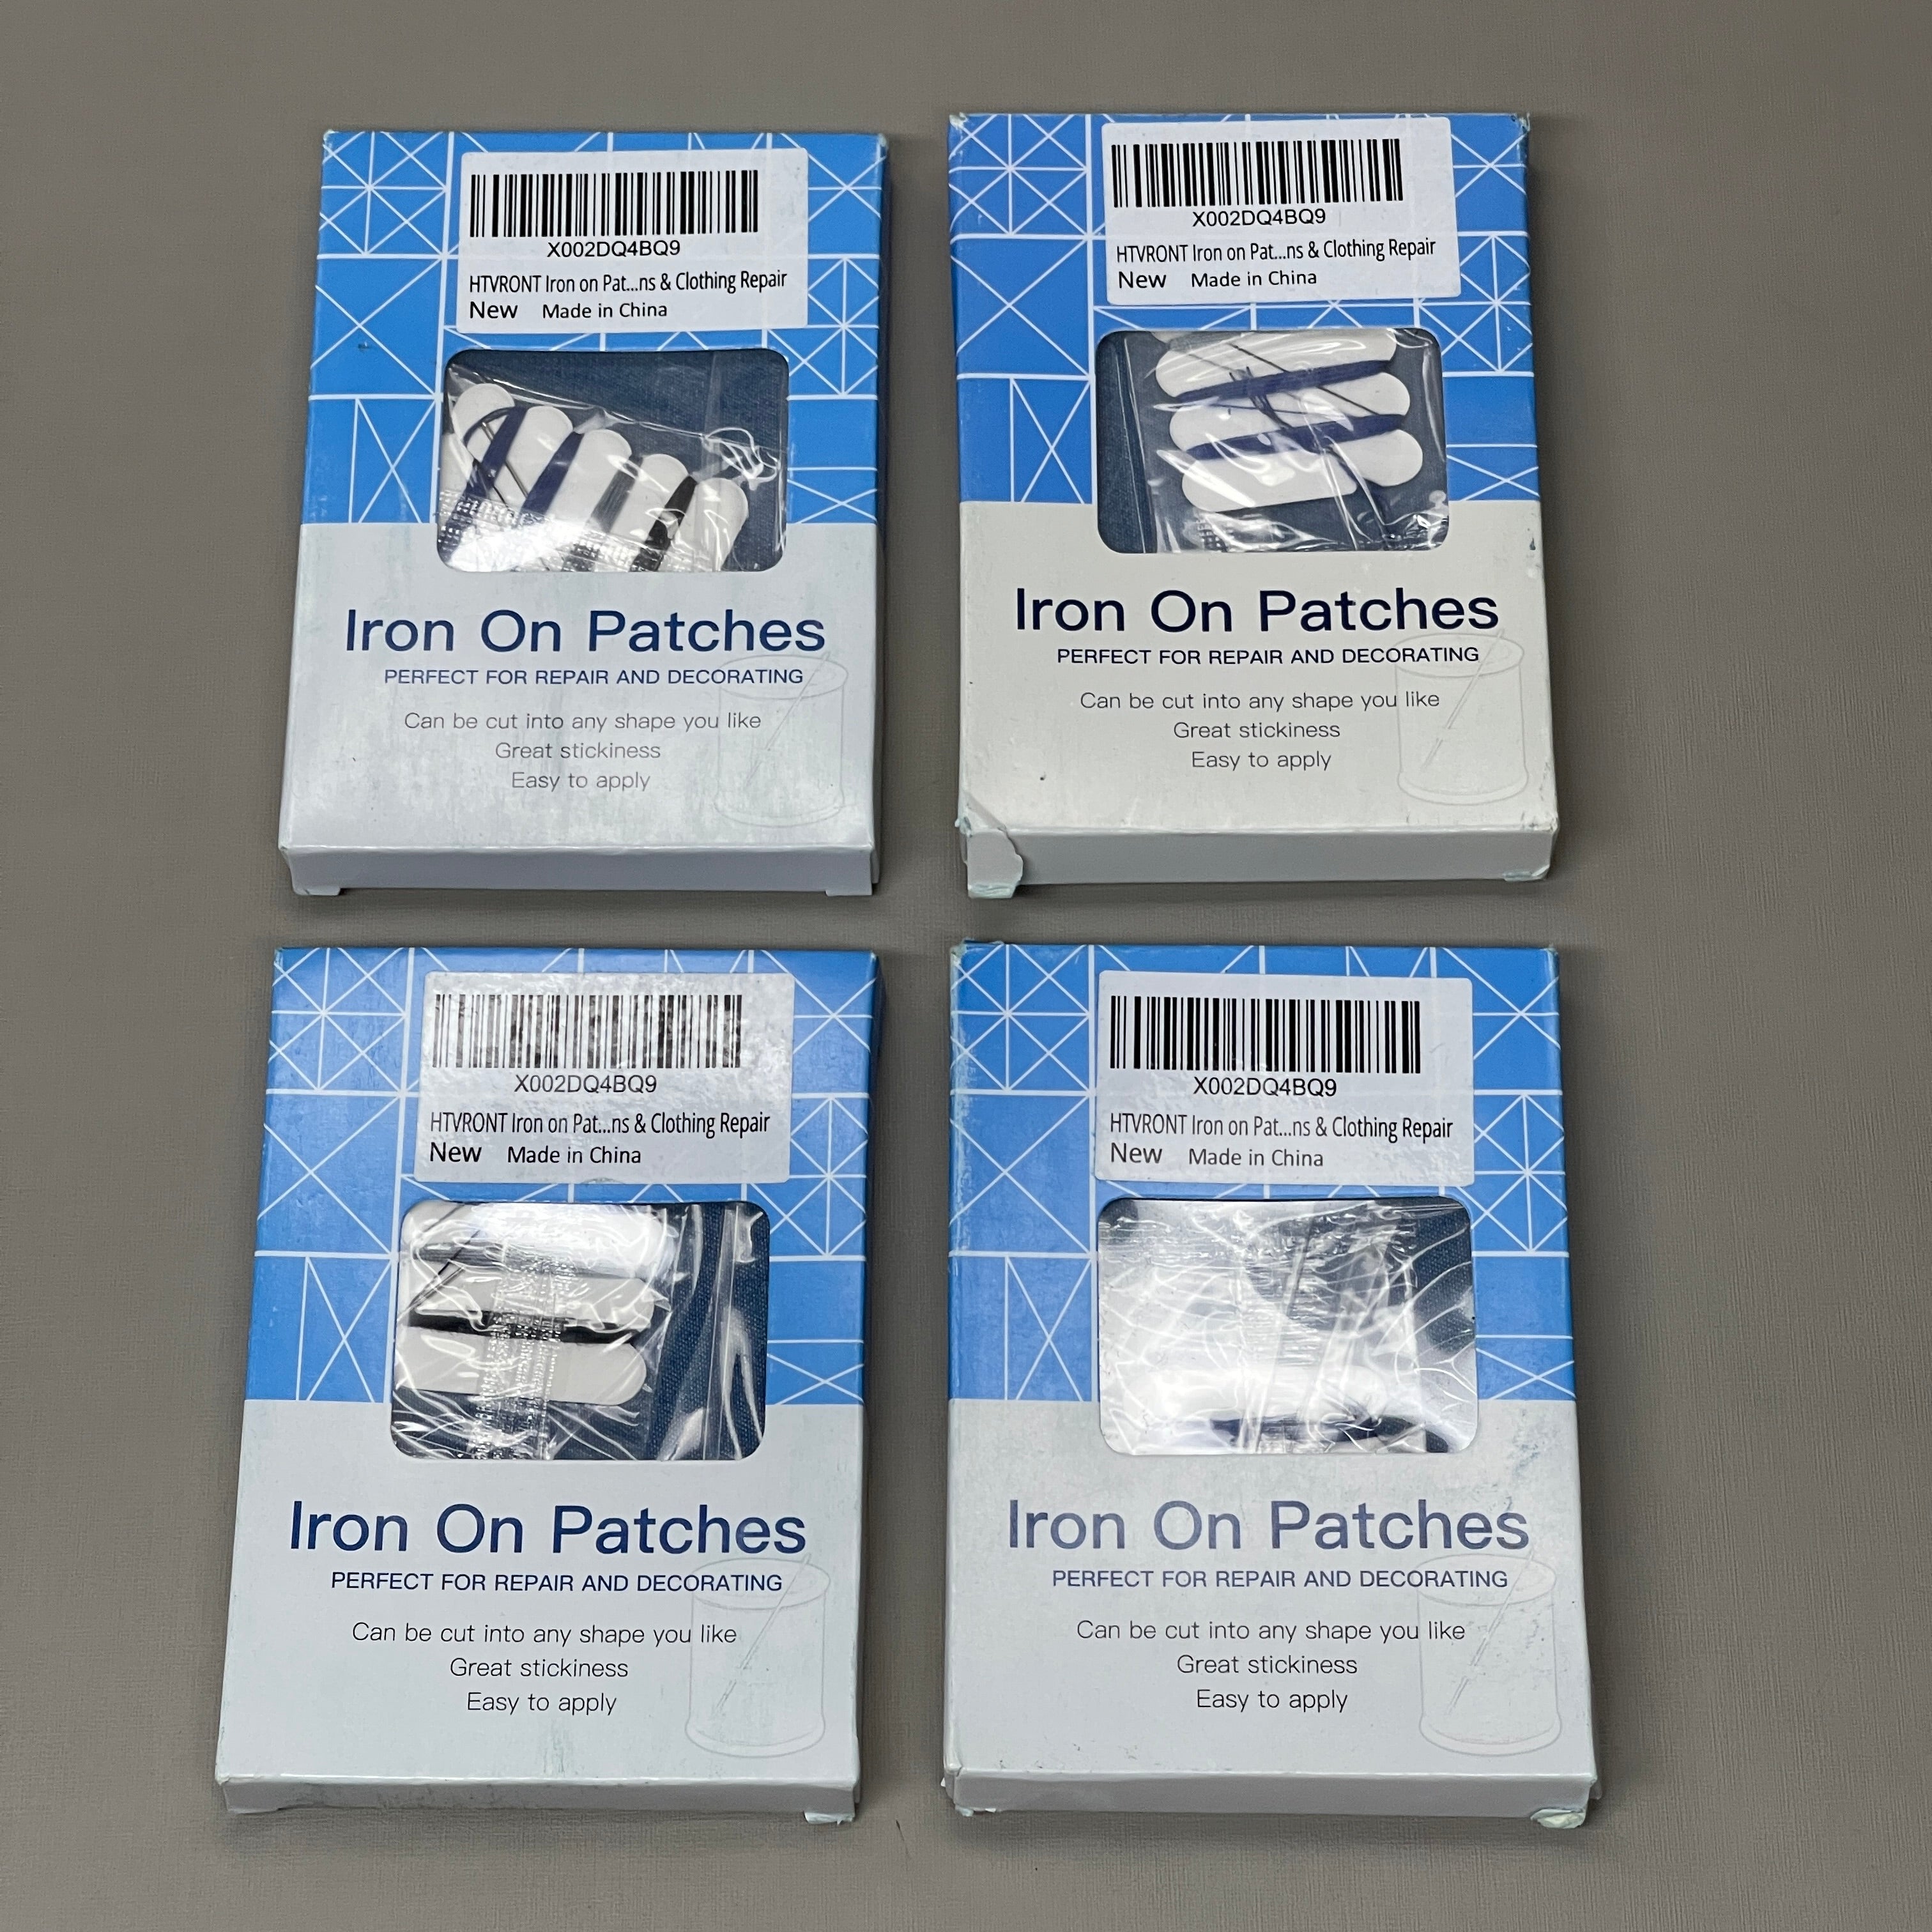 IRON ON Jean Patches 80 PATCHES! 3 x 4-1/4, Clothing Repair, 4 Shade –  PayWut